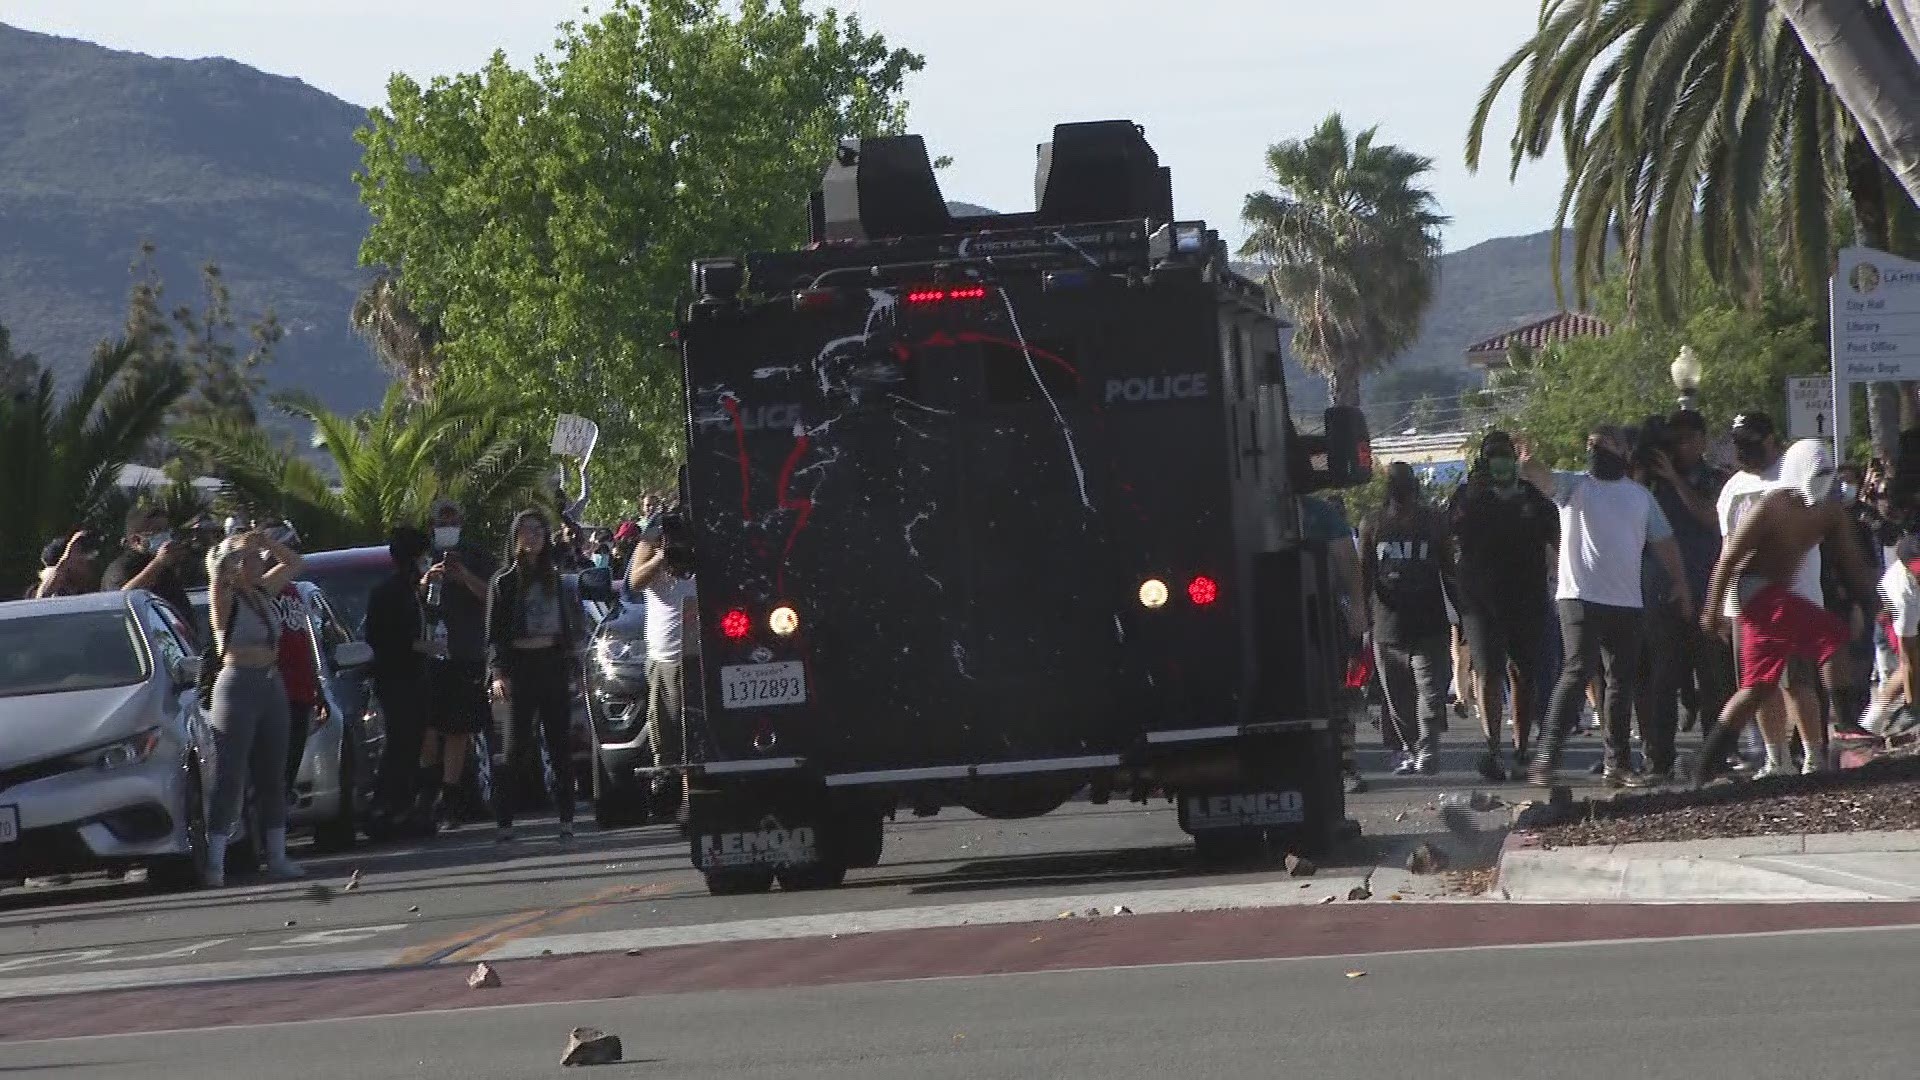 Demonstrators have attacked an armored vehicle and the La Mesa Police HQ.